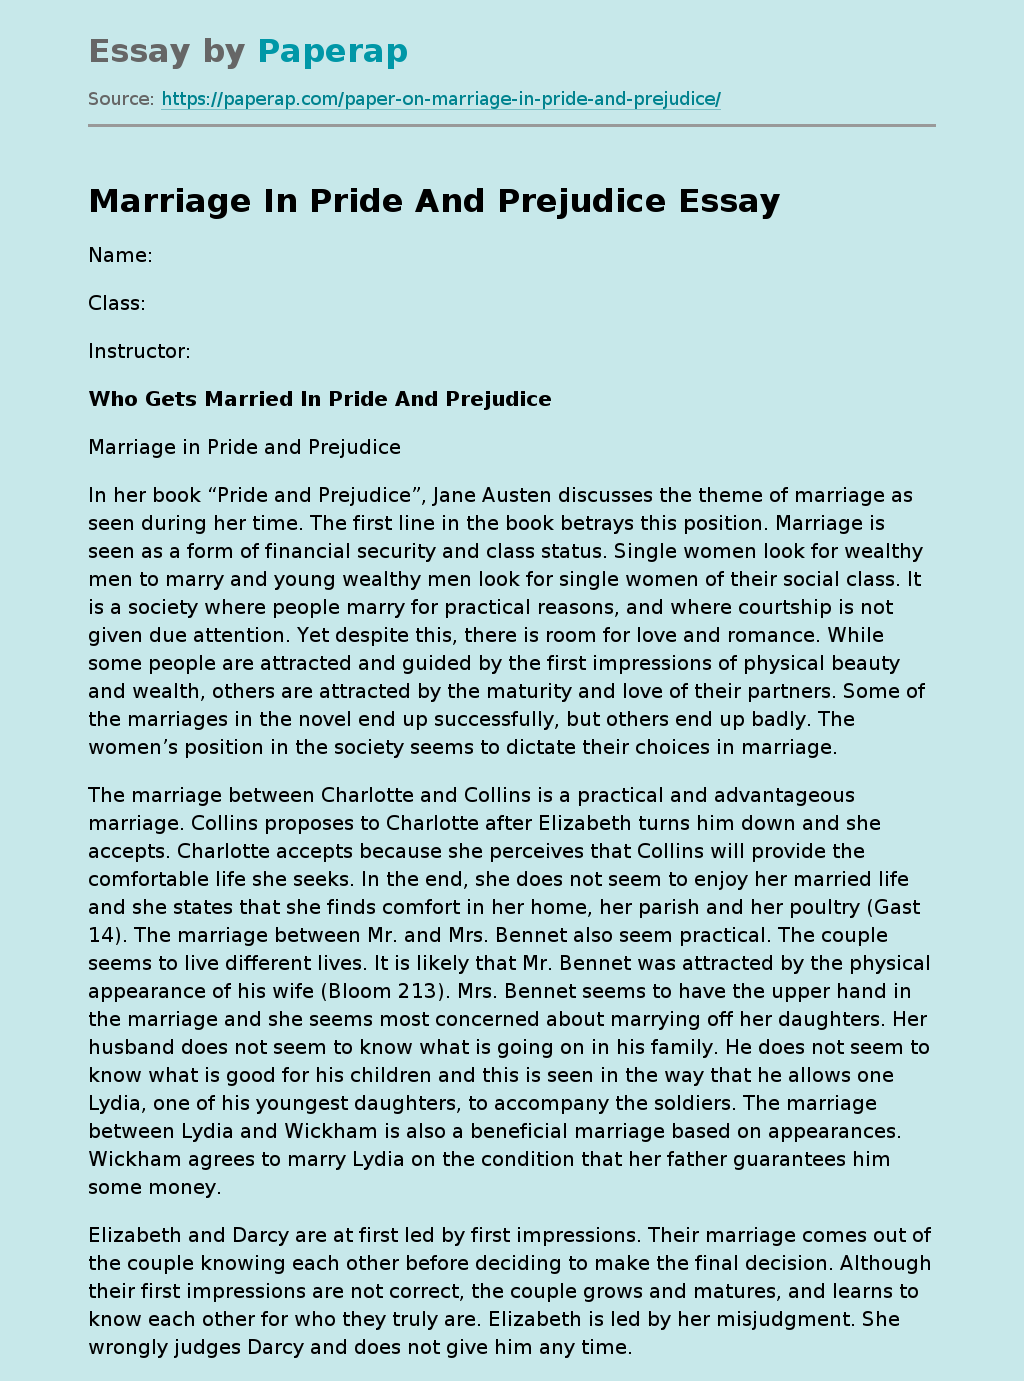 essay on marriage in pride and prejudice